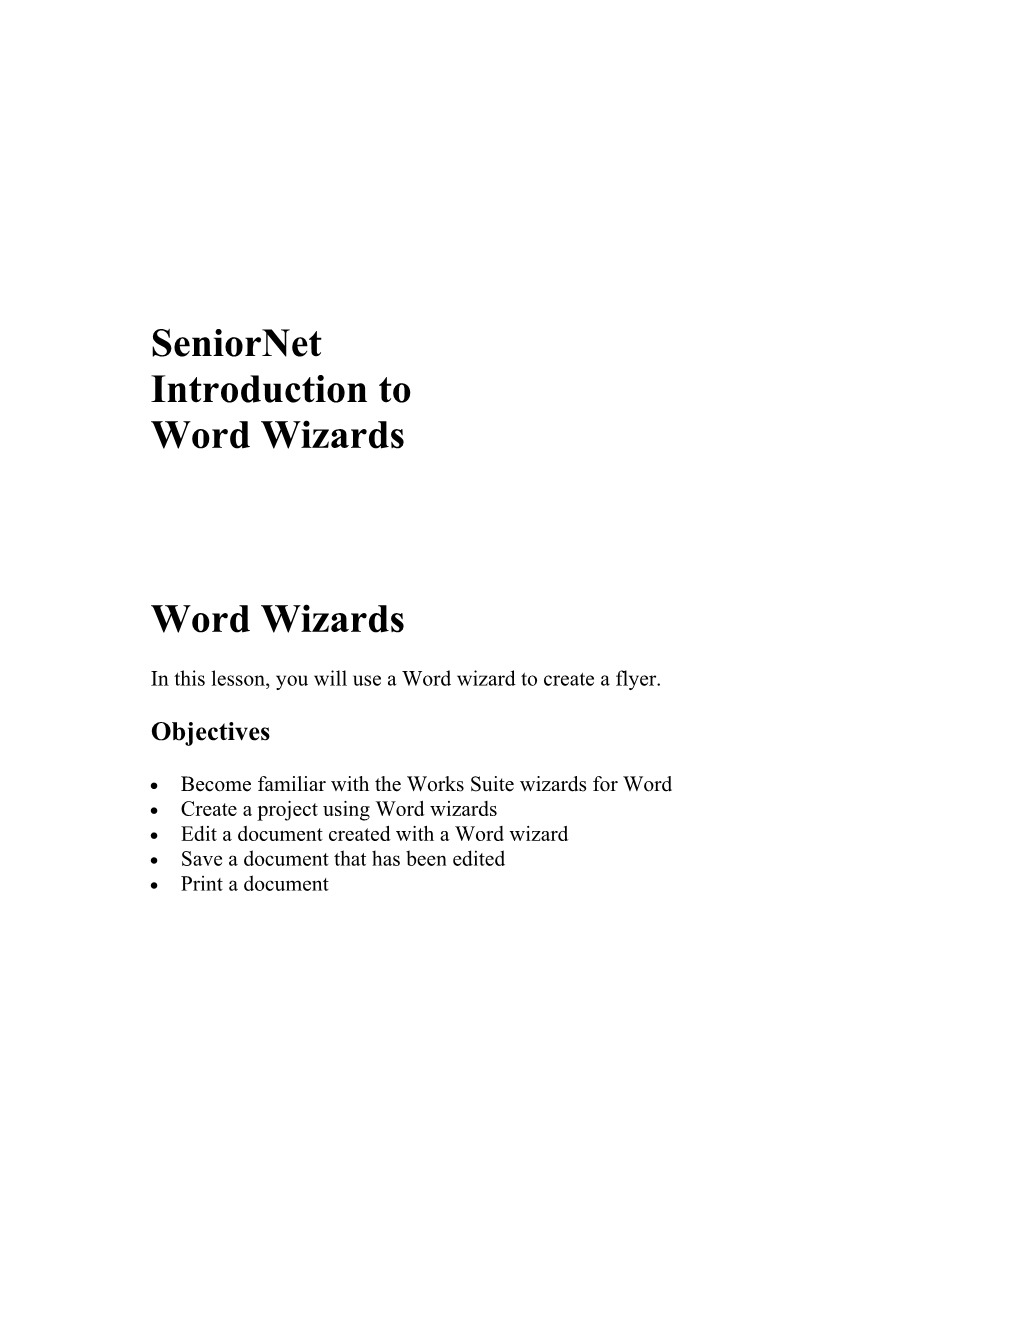 In This Lesson, You Will Use a Word Wizard to Create a Flyer